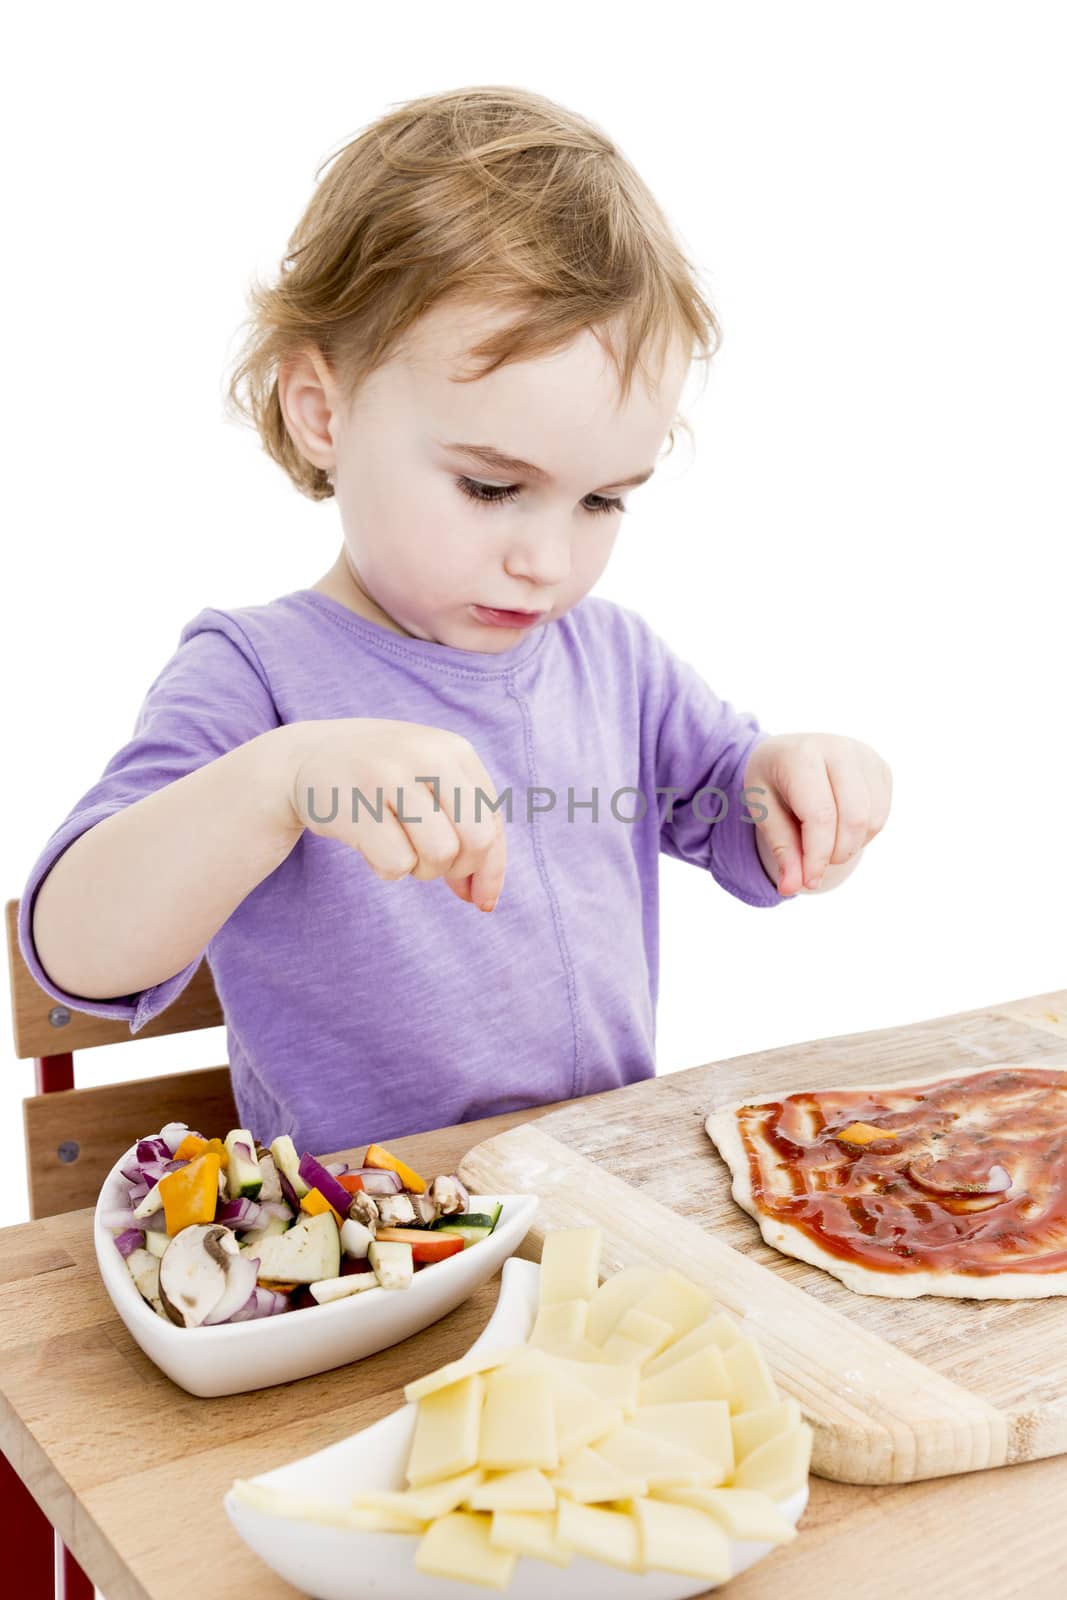 homemade pizza by a cute little girl by gewoldi